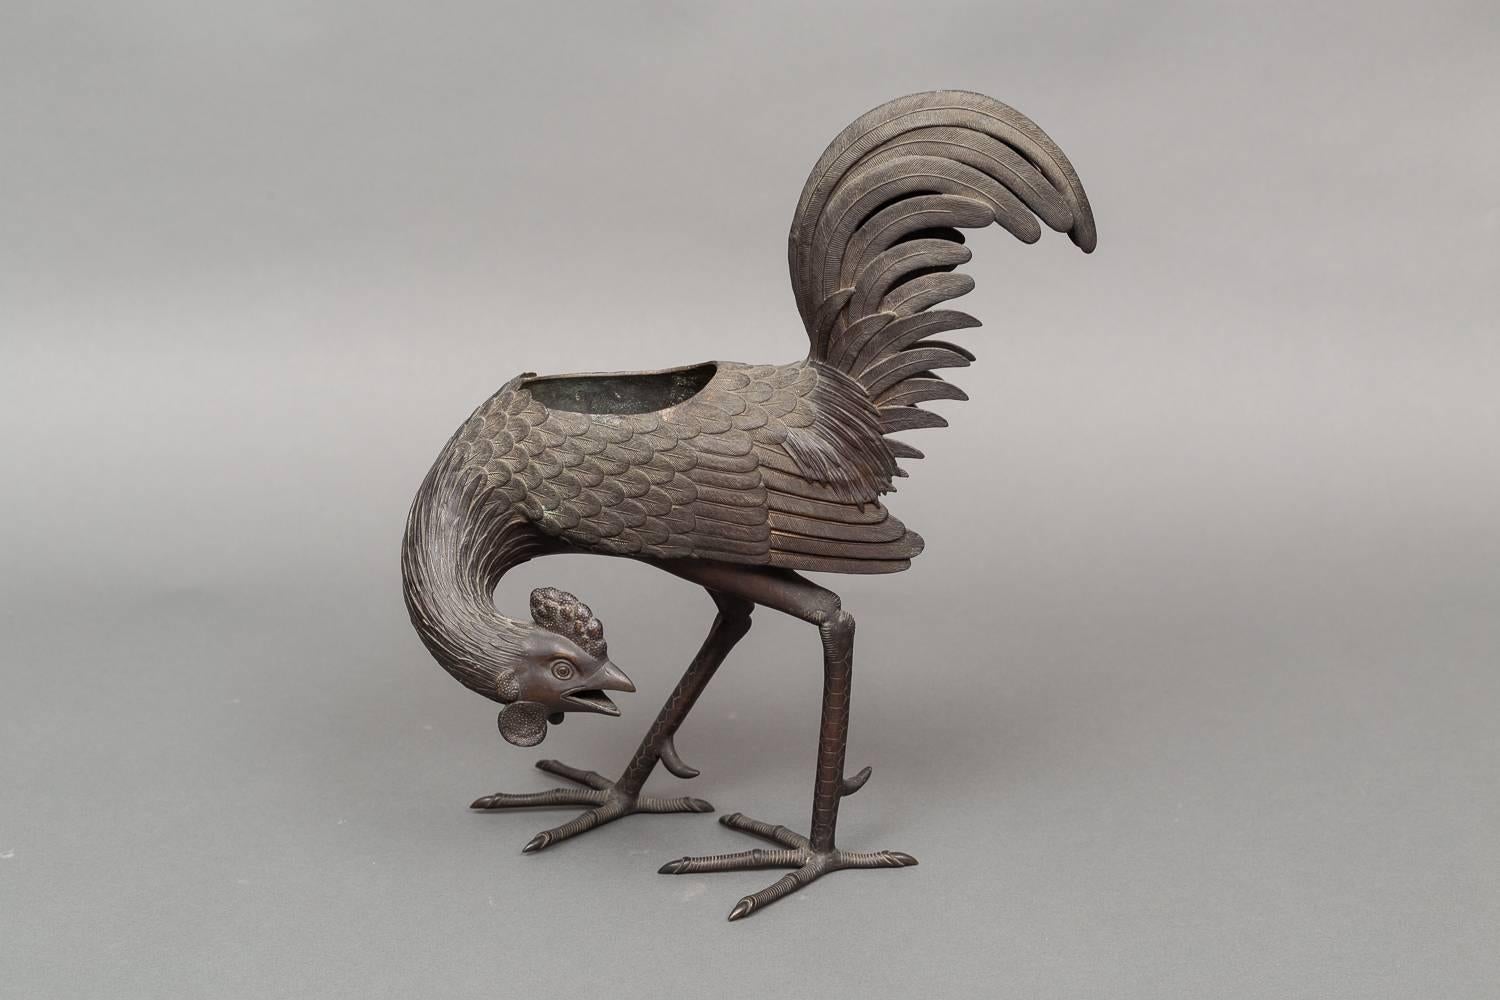 Bronze Koro (Japanese incense burner) in the shape of a rooster
Removable top.